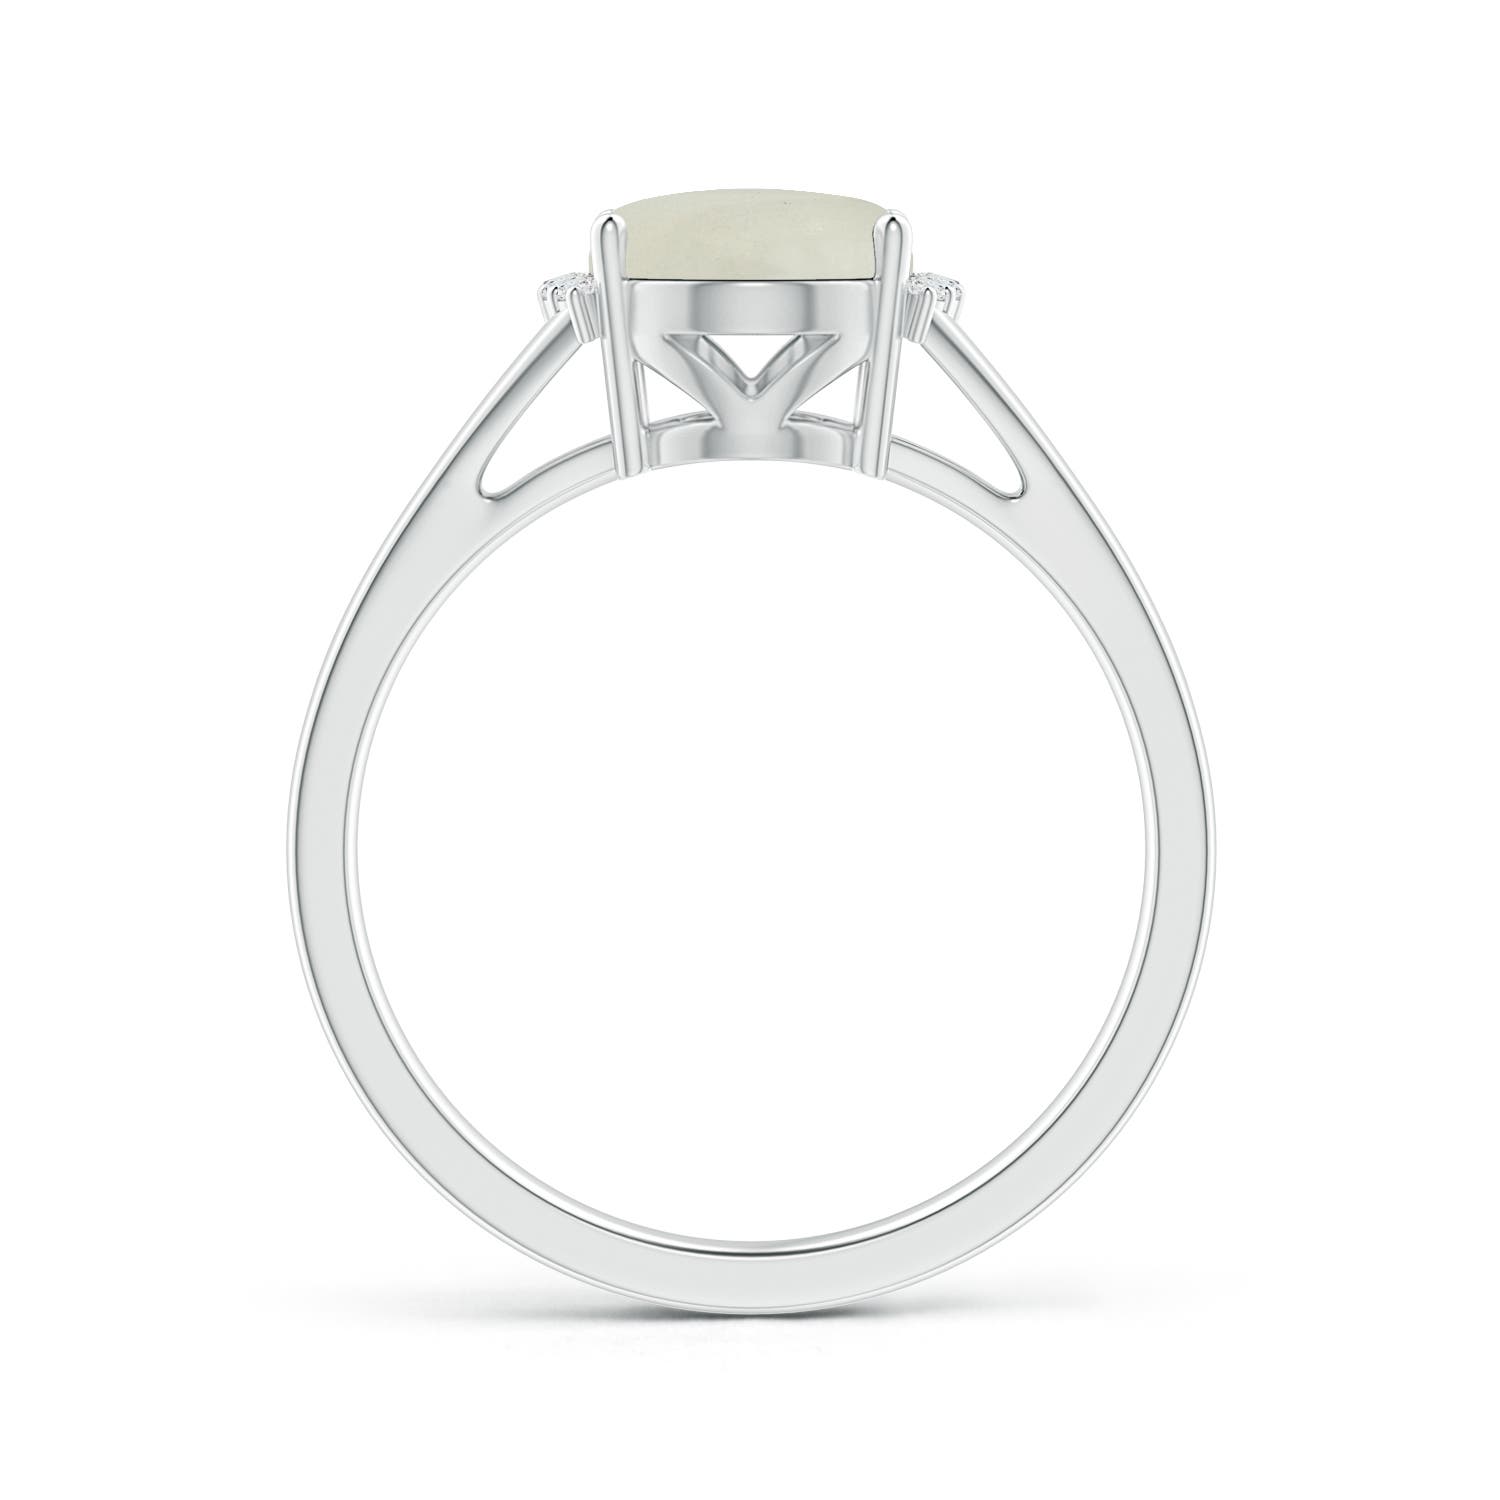 AA - Moonstone / 1.77 CT / 14 KT White Gold